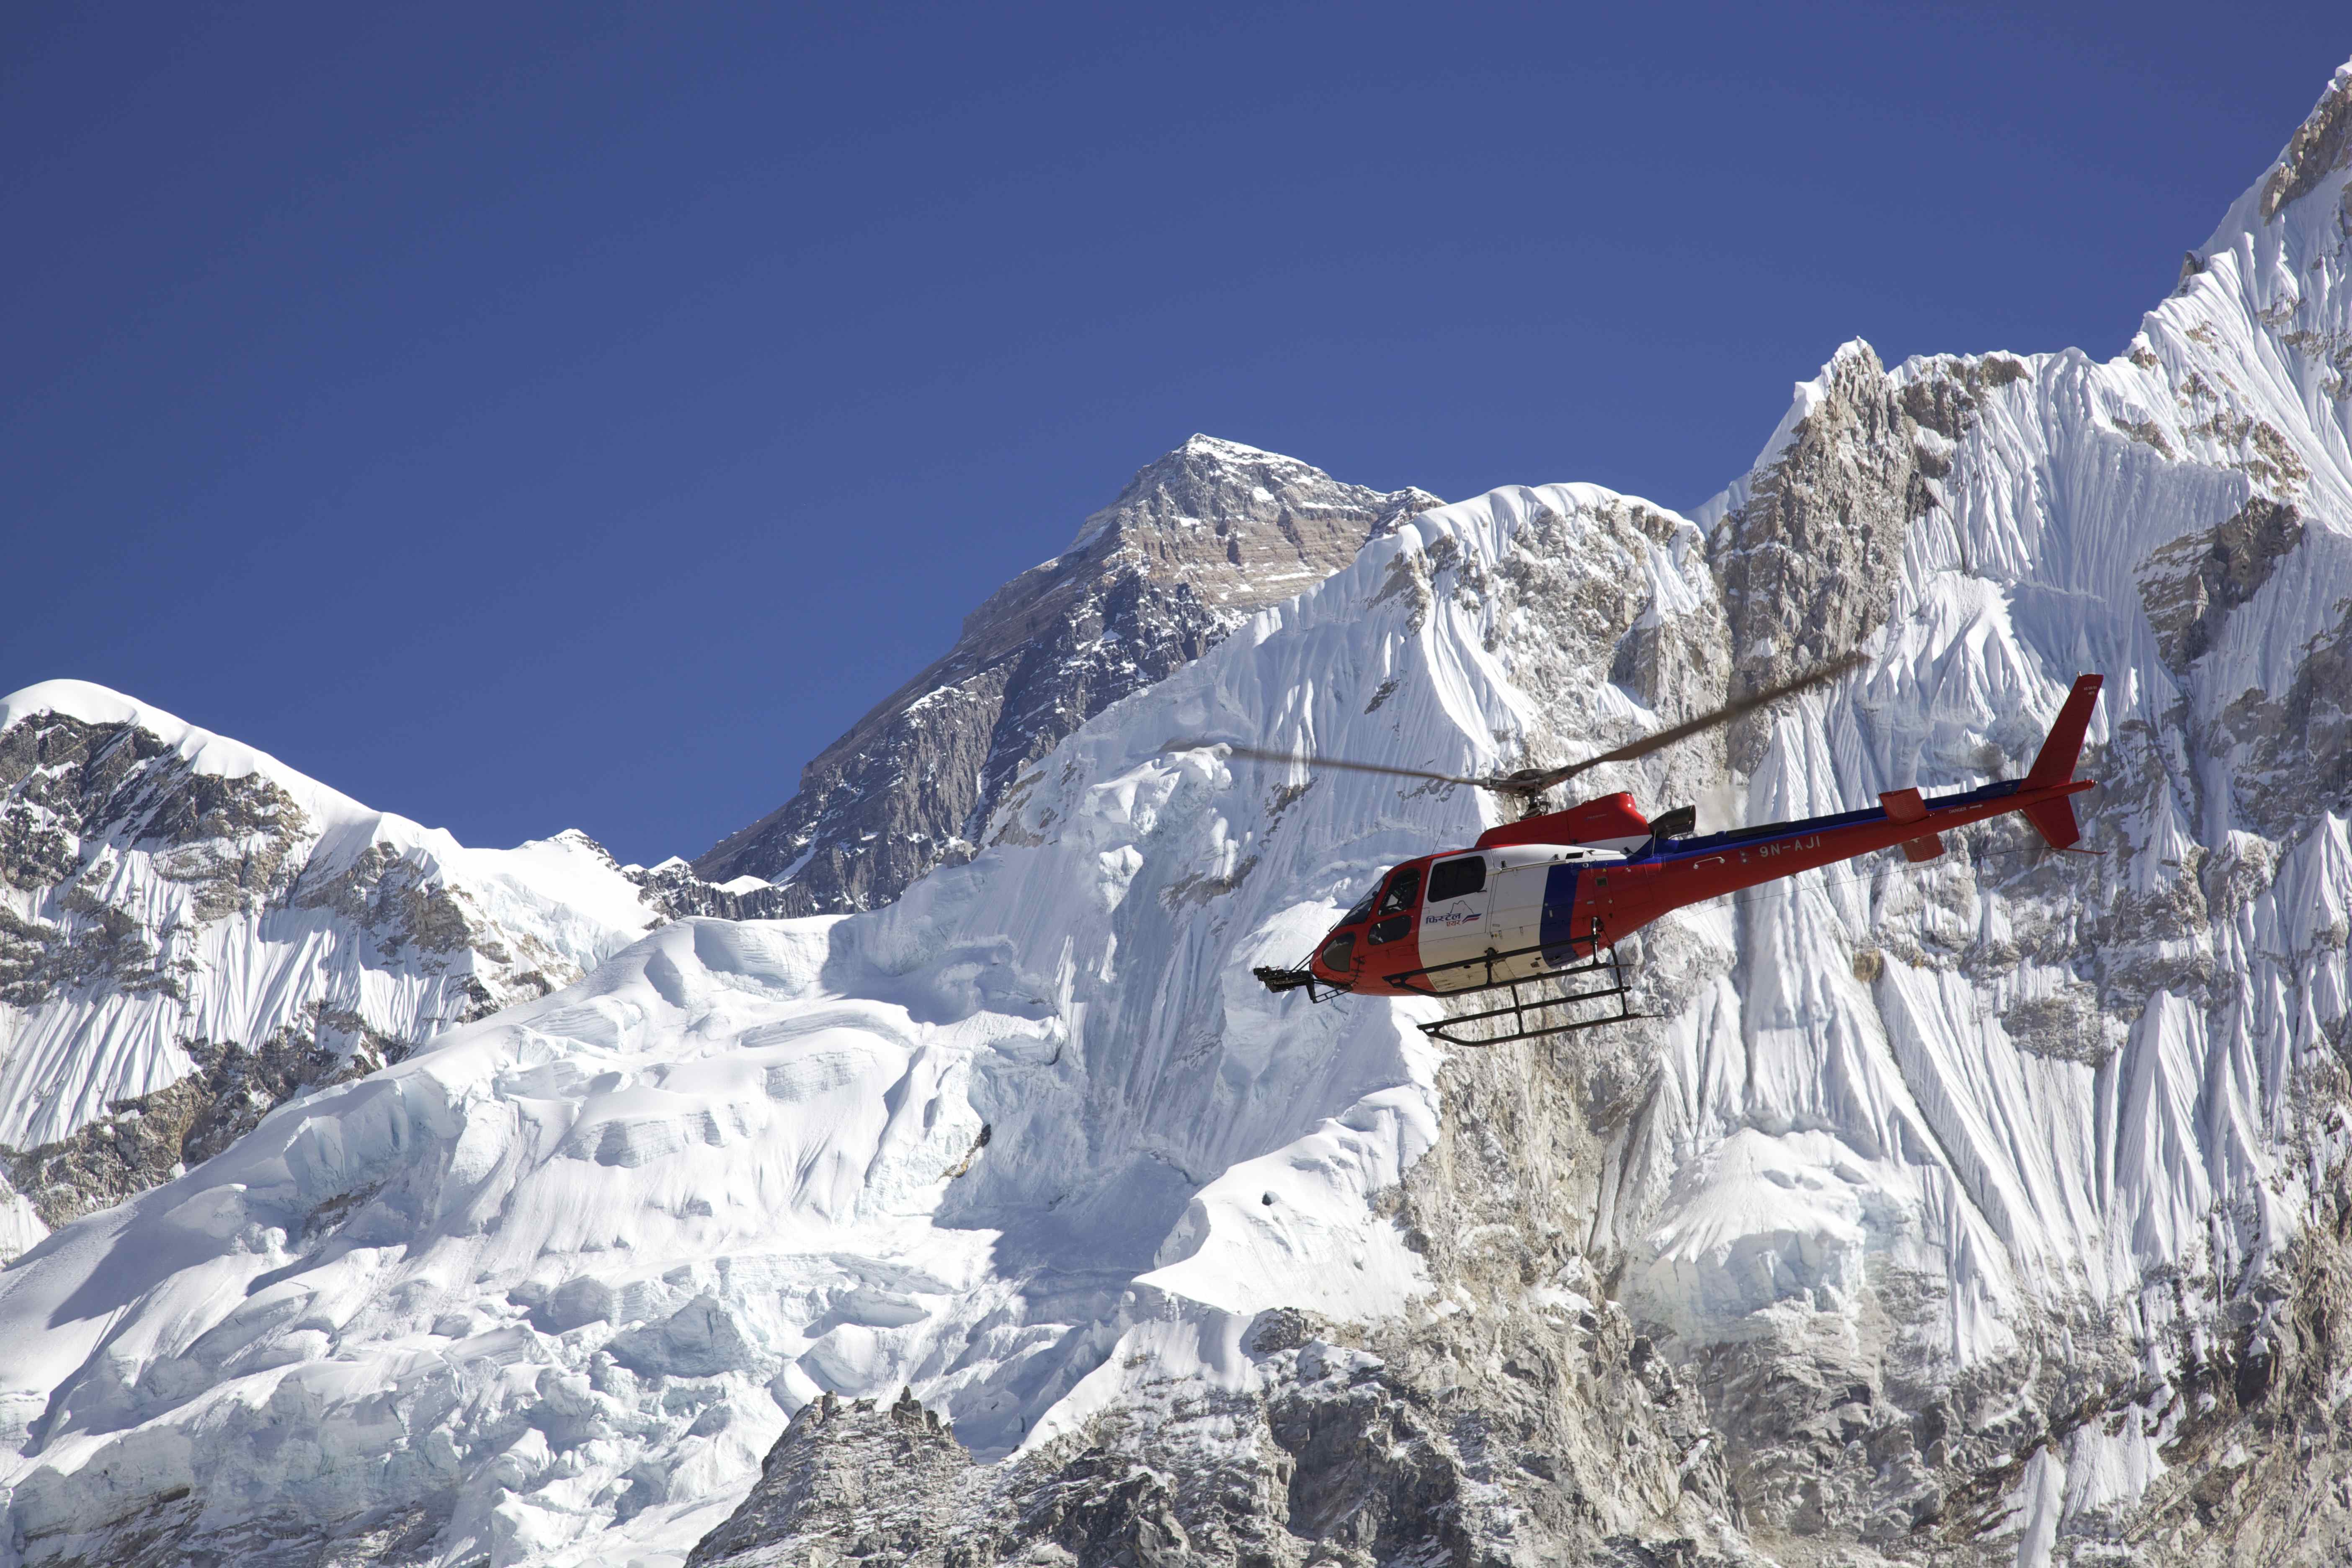 Shooting 3D tests on Mount Everest. Flying up to 7300 m!